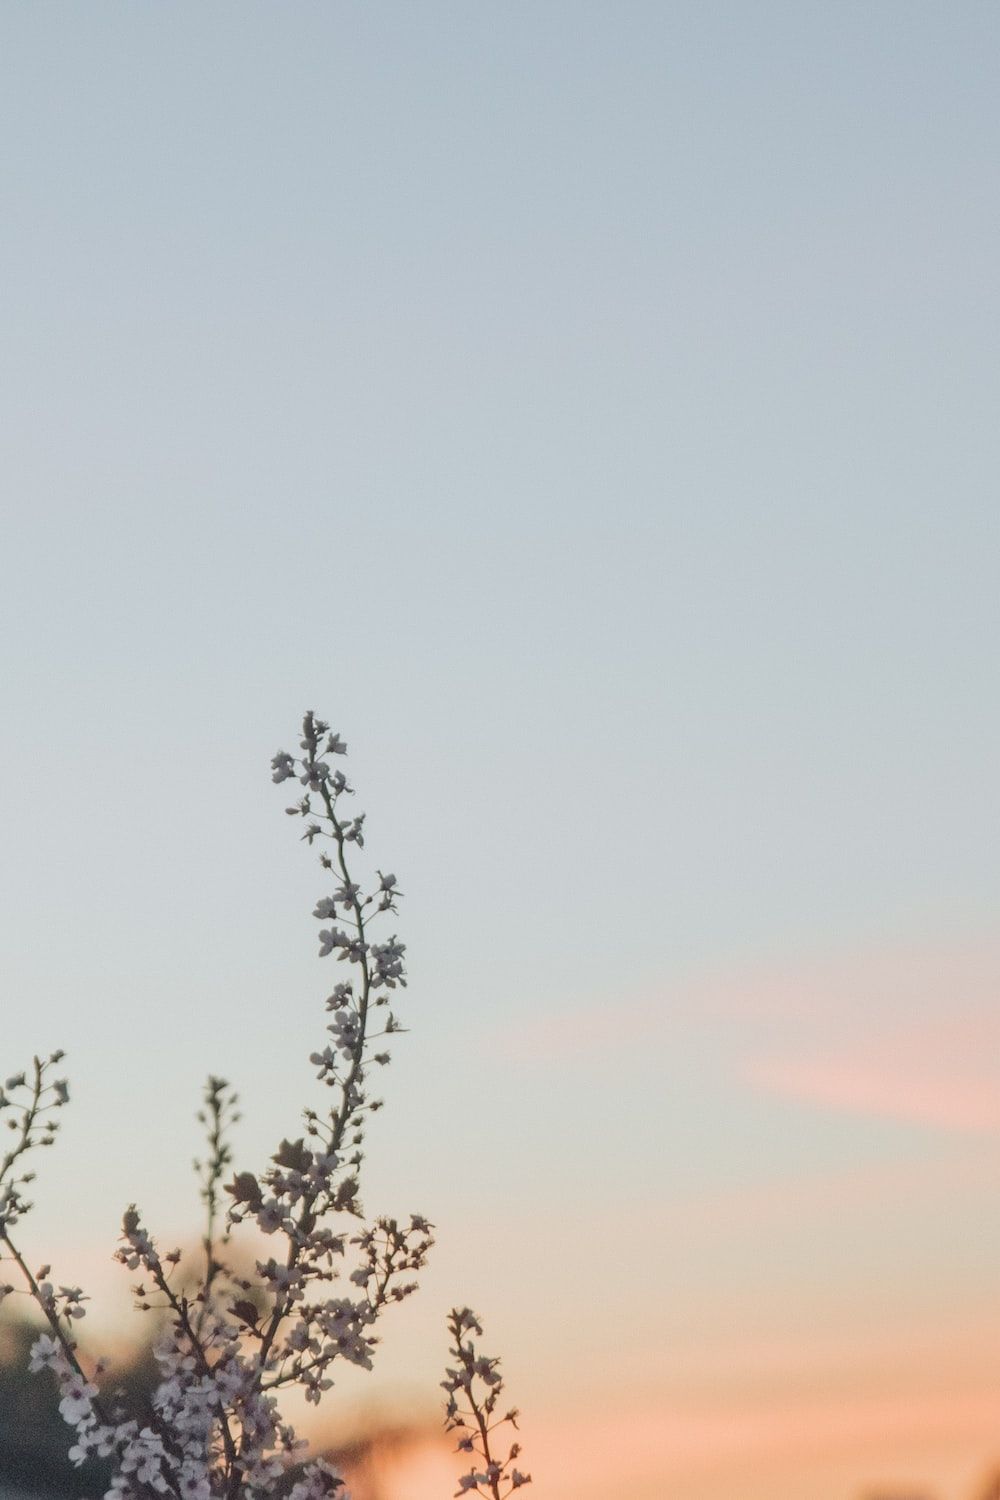 A tree branch with flowers on it in front of a sunset - Pastel minimalist